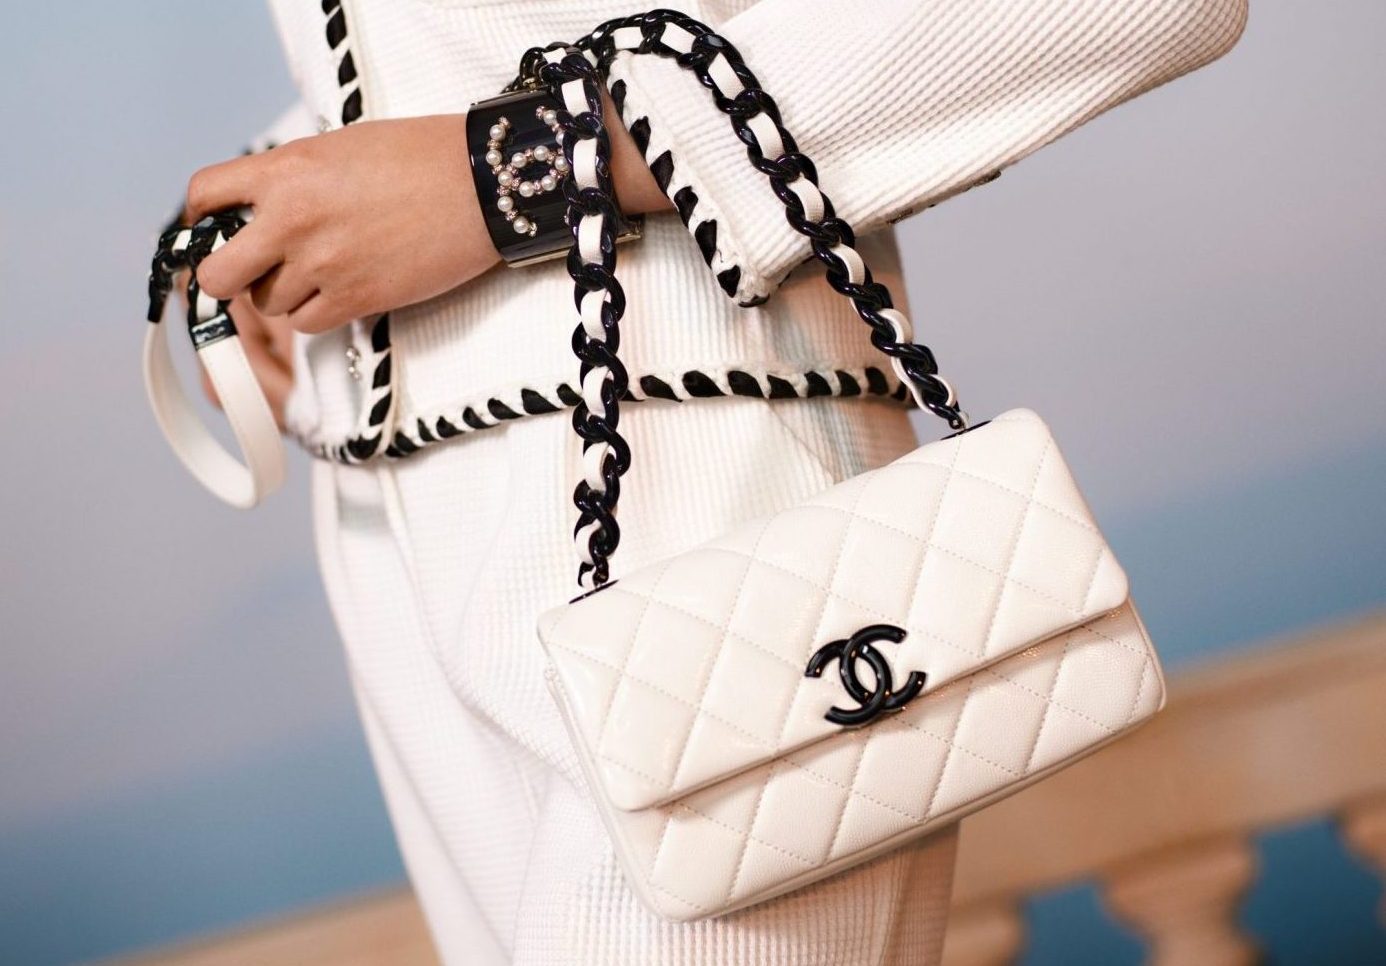 The Importance of Authentication in the Vintage Chanel Market